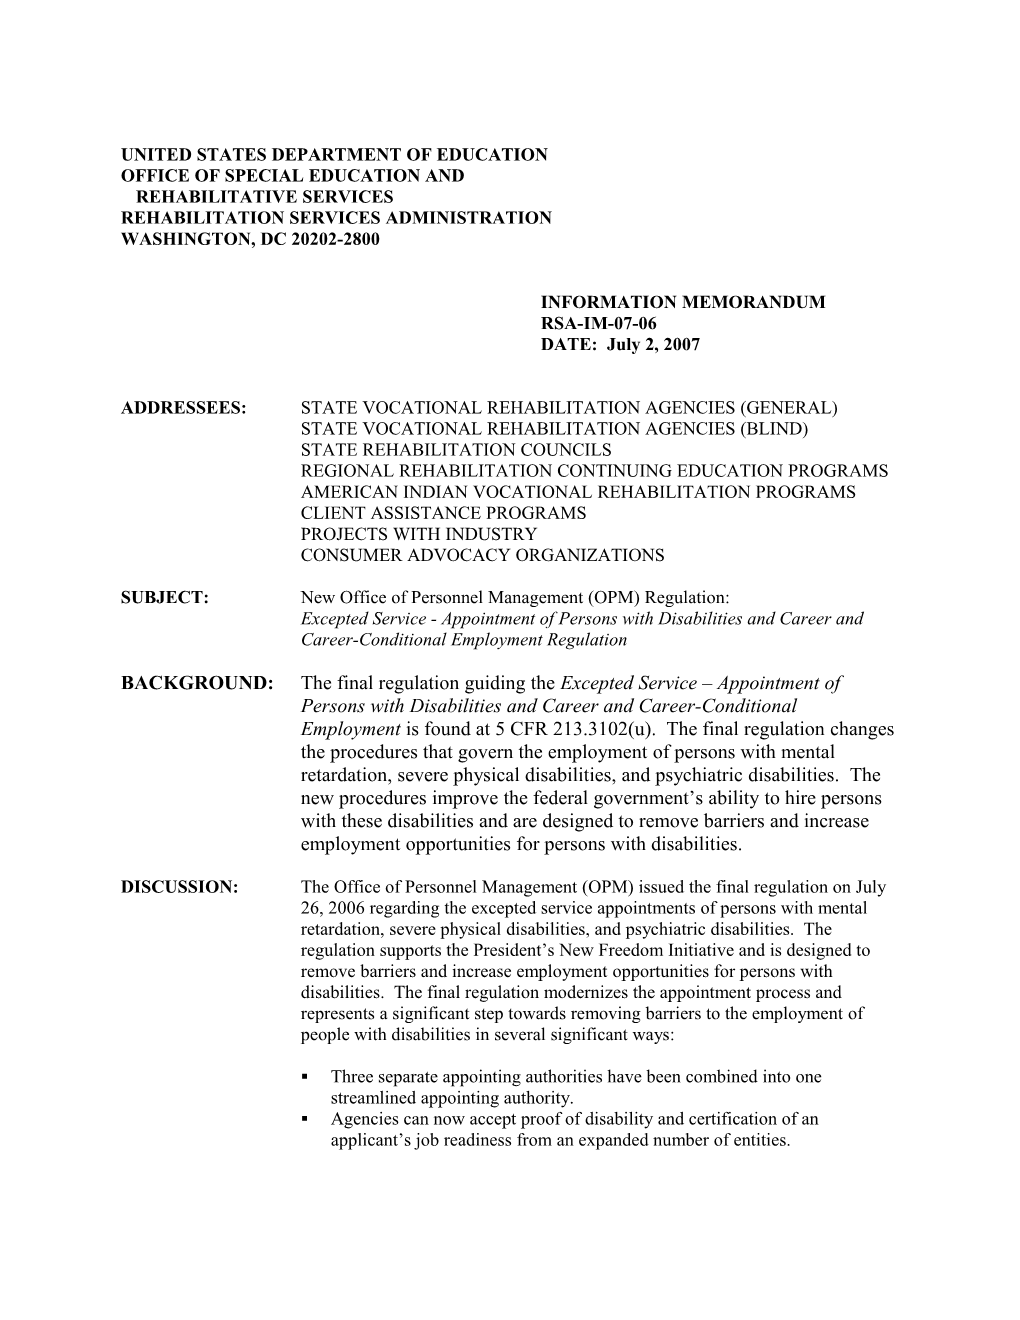 RSA IM-07-06 - New Office of Personnel Management (OPM) Regulation (MS Word)